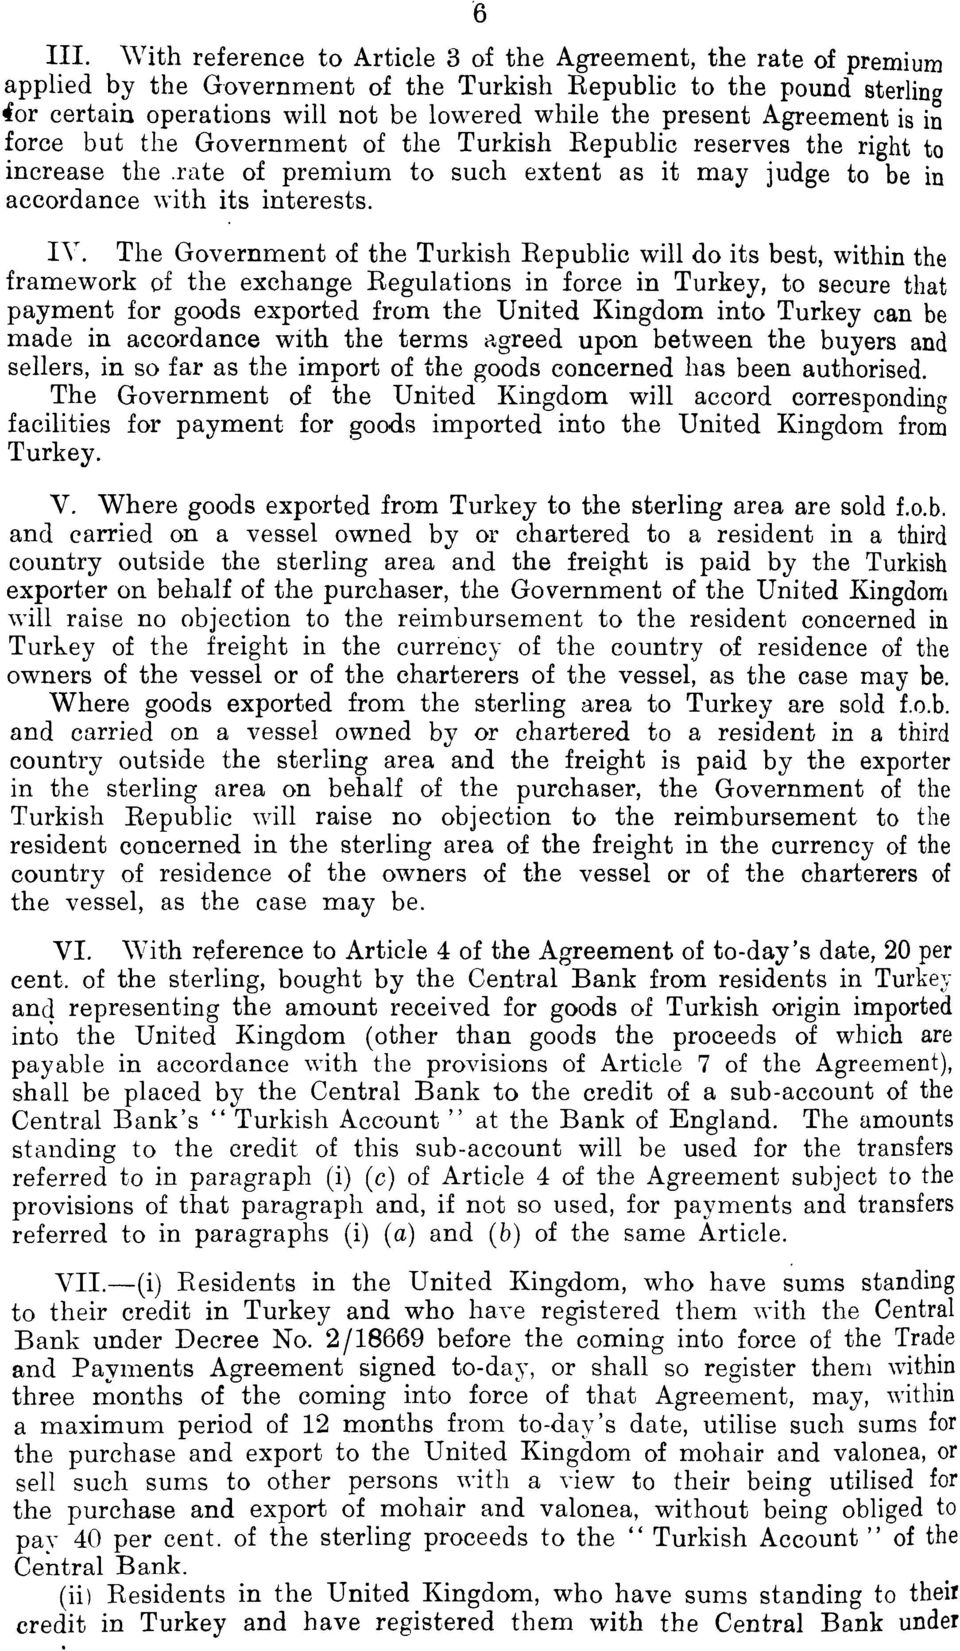 Agreement is in force but the Government of the Turkish Republic reserves the right to increase the.rate of premium to such extent as it may judge to be in accordance with its interests. IV.